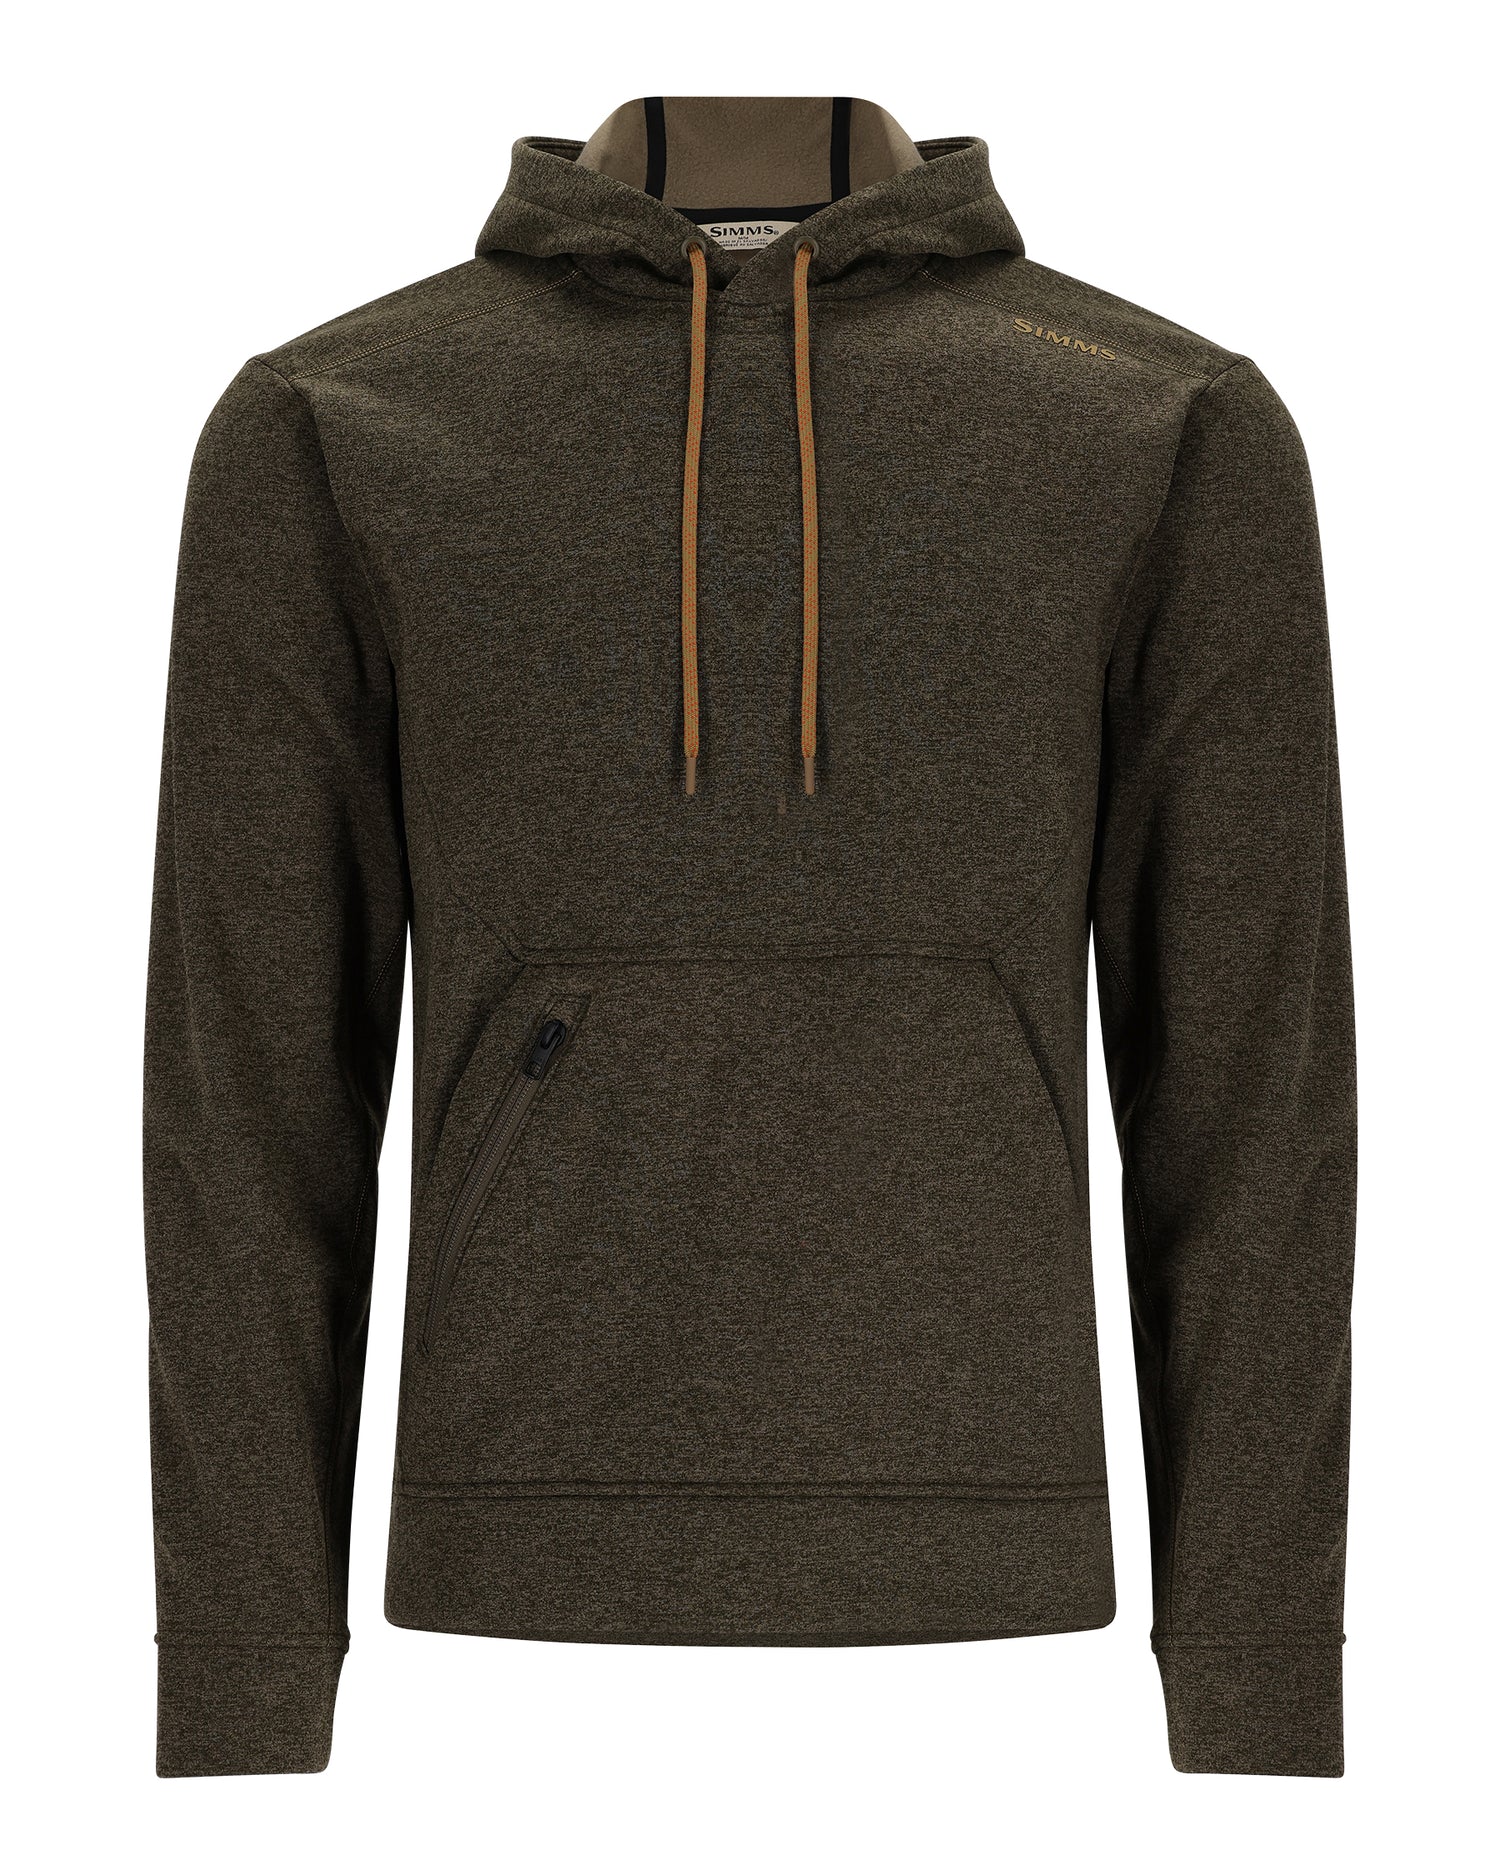 M's Simms CX Hoody  Simms Fishing Products